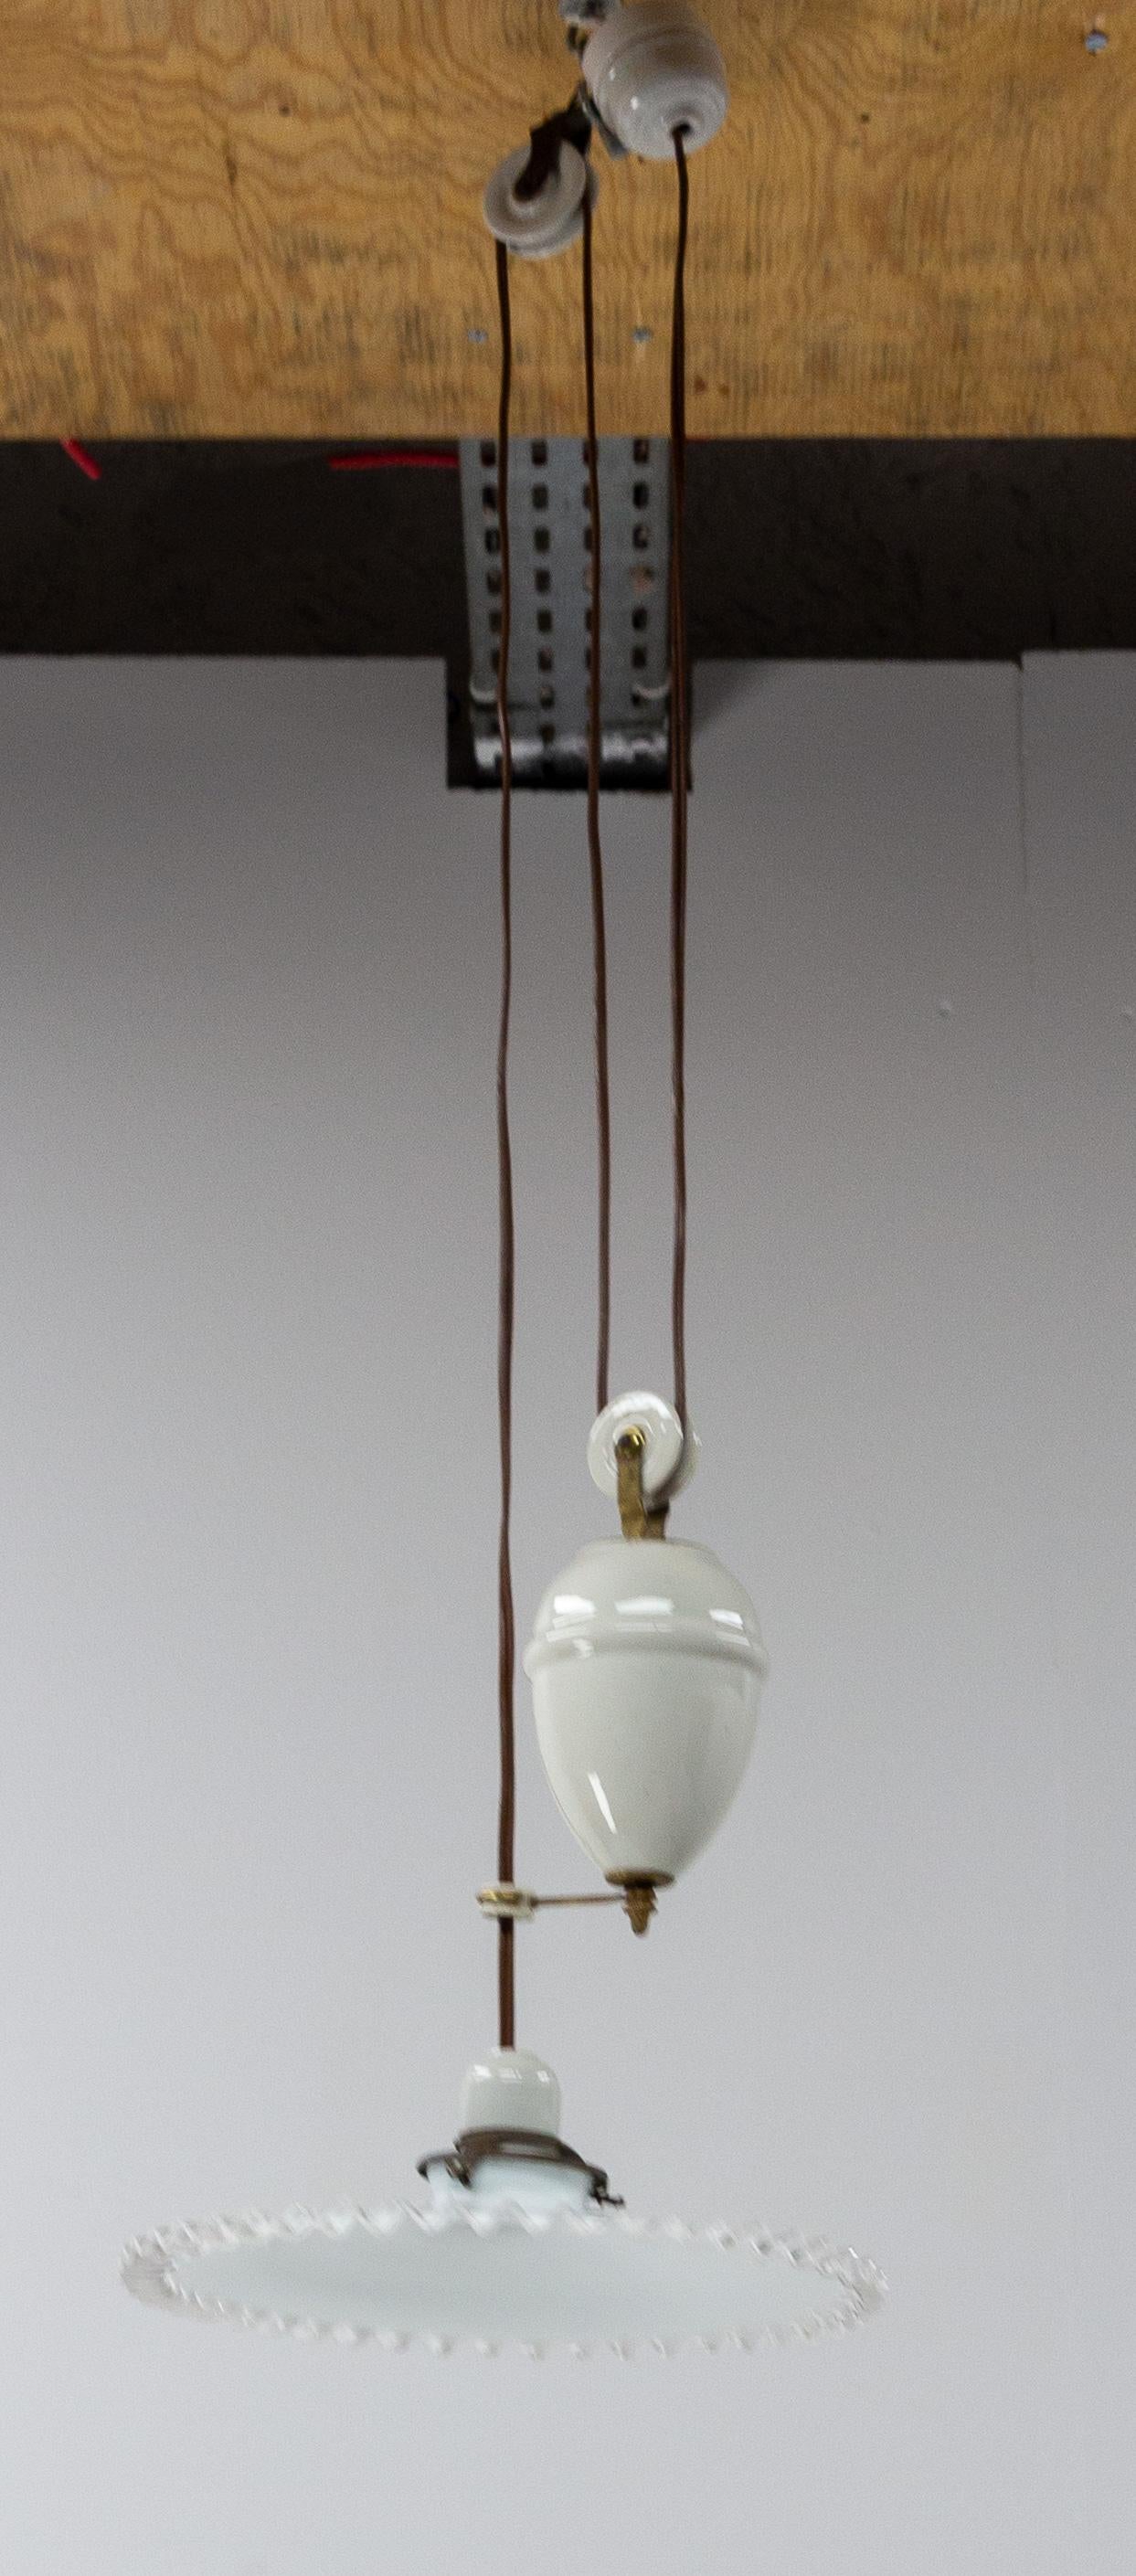 Ceiling pendant lamp in glass and opaline early 20th century.
French counter weight chandelier. White glass diffuser and porcelain weight for adjusting the overall length.
This lustre makes a nice shadow on the walls of the room when it is